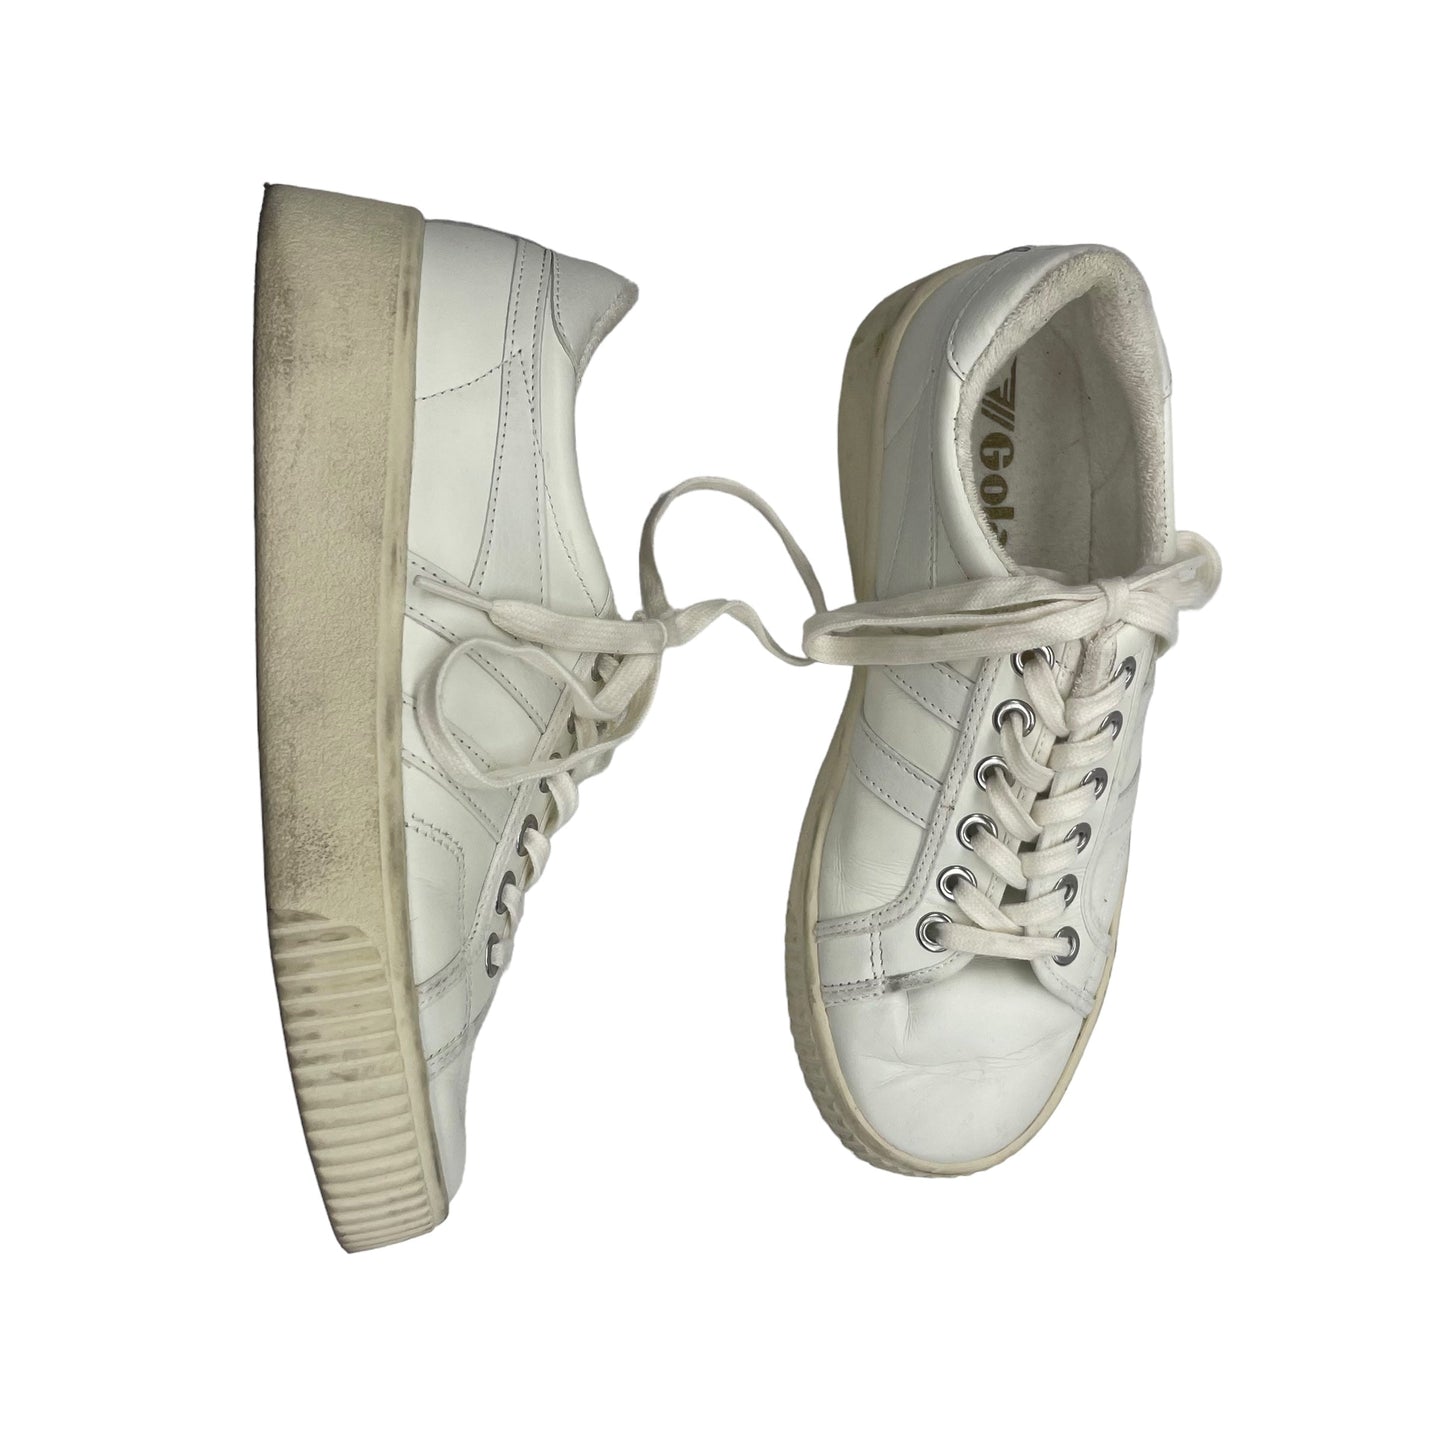 CREAM GOLA SHOES SNEAKERS, Size 9